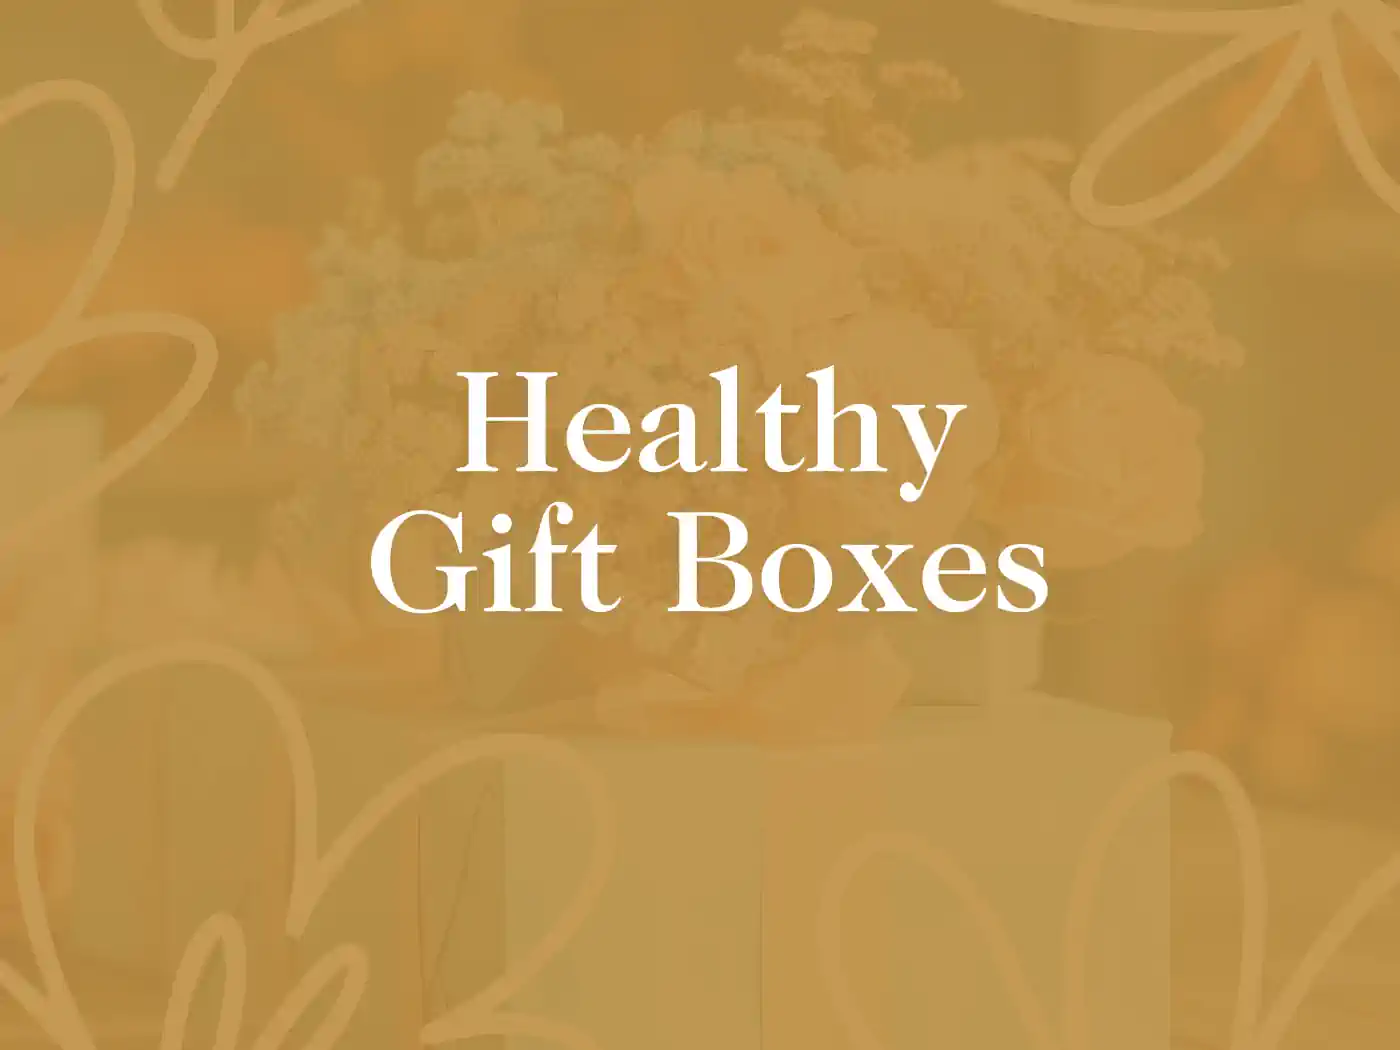 Elegant promotional banner featuring the text 'Healthy Gift Boxes' overlaid on a soft, golden background with a blurred image of a bouquet of flowers, symbolizing wellness and care. Guest House and Hotel Gift Boxes Delivered with Heart. Fabulous Flowers and Gifts.